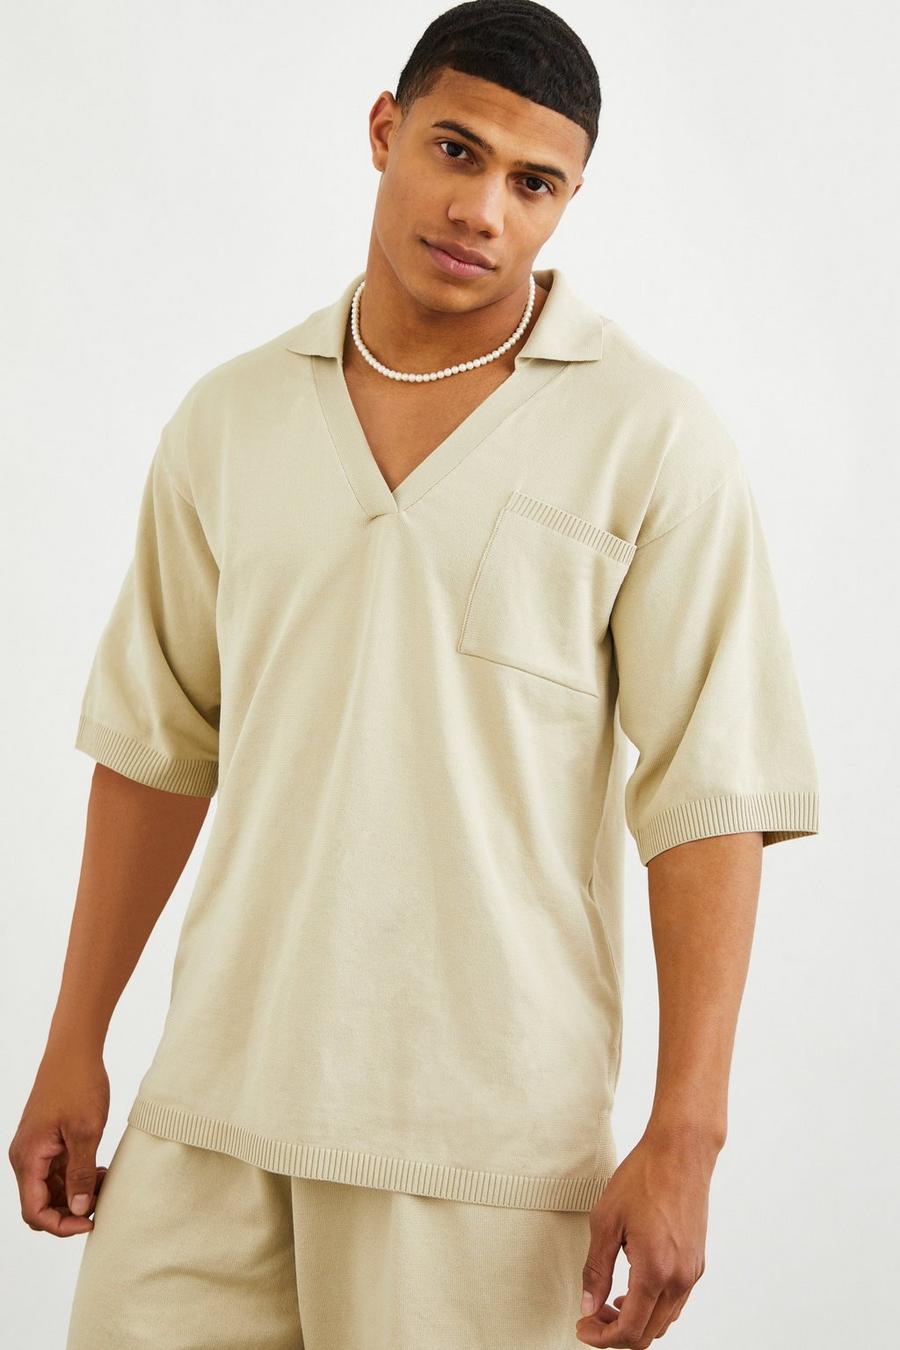 Oversized Open Weave Pocket Knitted Revere Polo, Stone beis